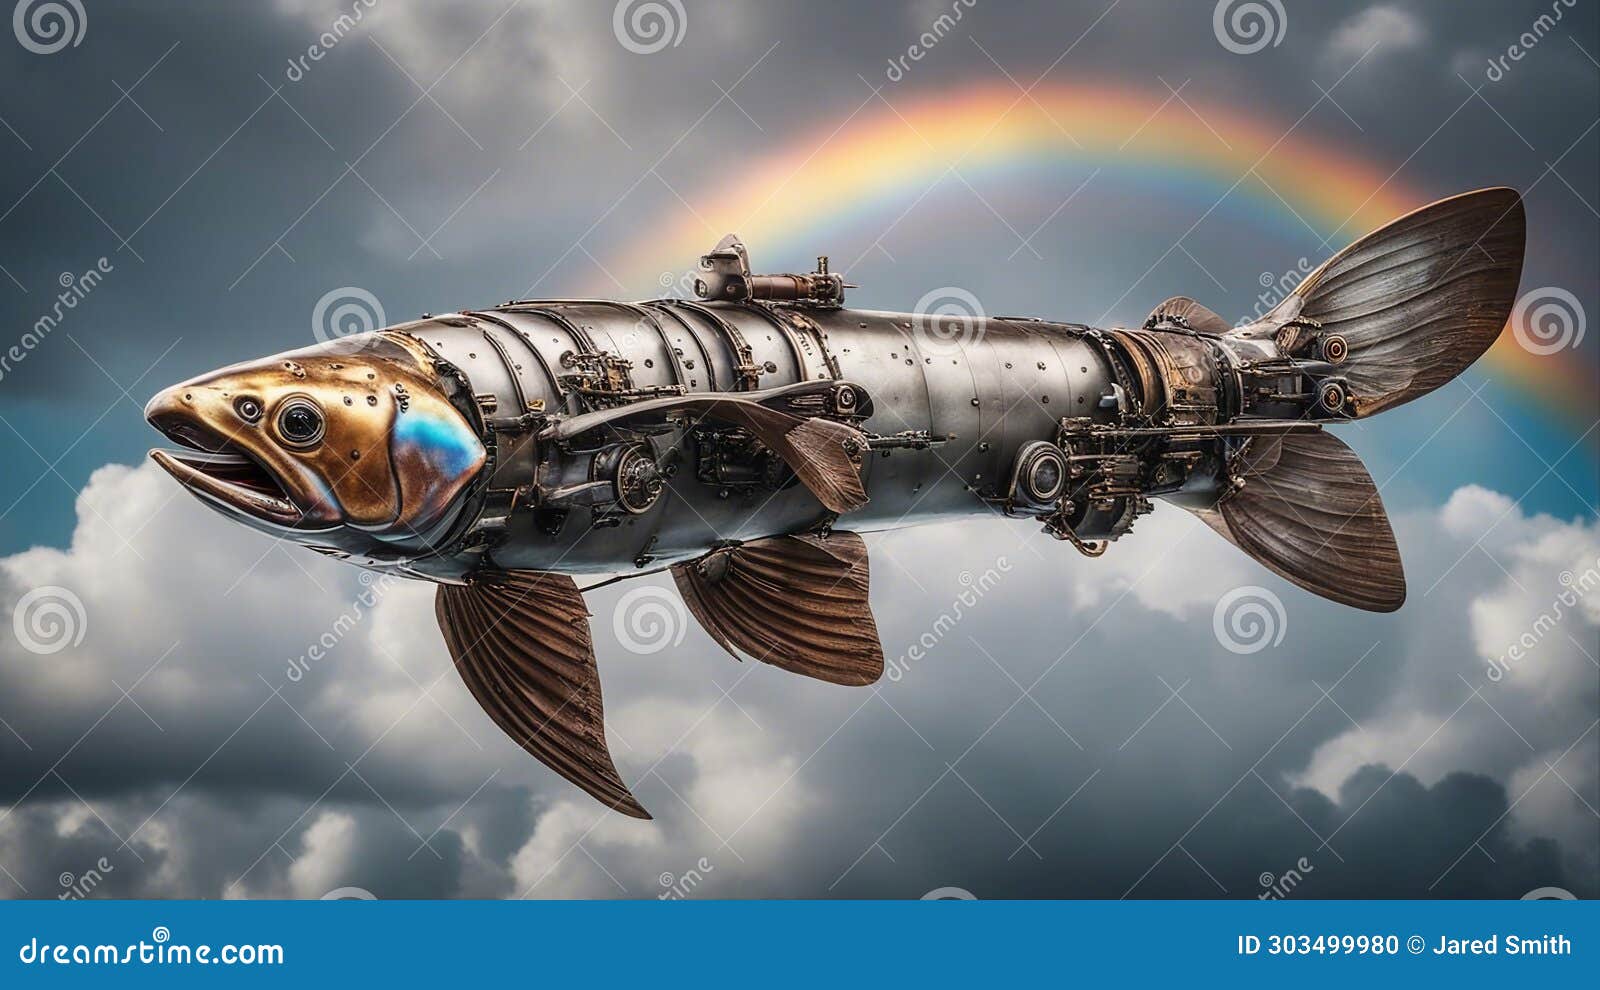 Fish in the Sky Steampunk Scene of a Metal Rainbow Trout Fish Flying in the  Sky, Propellers, Stock Illustration - Illustration of trout, flying:  303499980